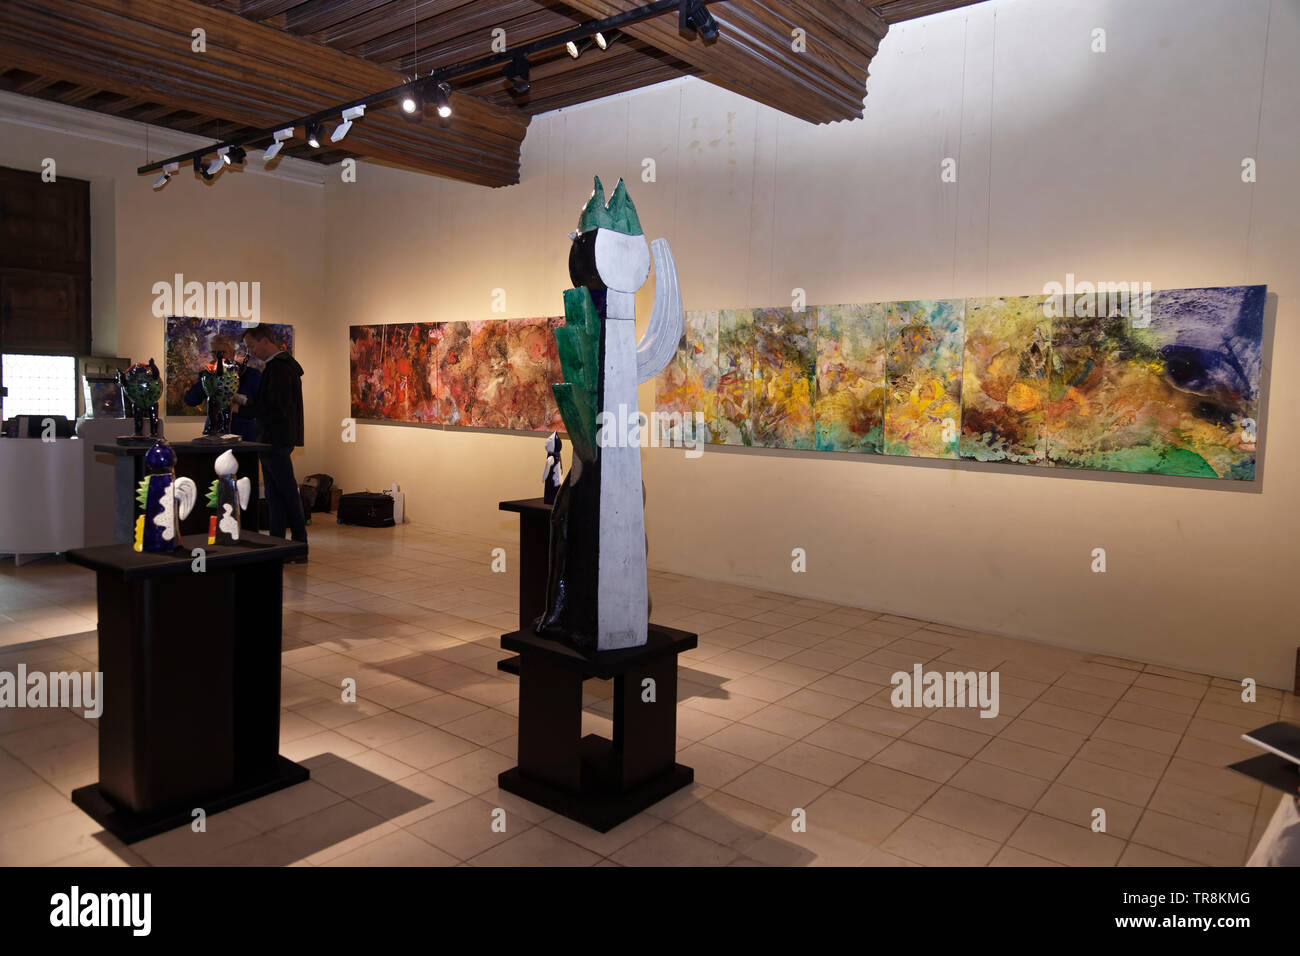 Tours, France.24th May,2019.Artworks of Coville & P. Charpentier at Exhibition Re-naissance(s) of the Capazza Gallery. ©:V Phitoussi/Alamy Stock Photo Stock Photo